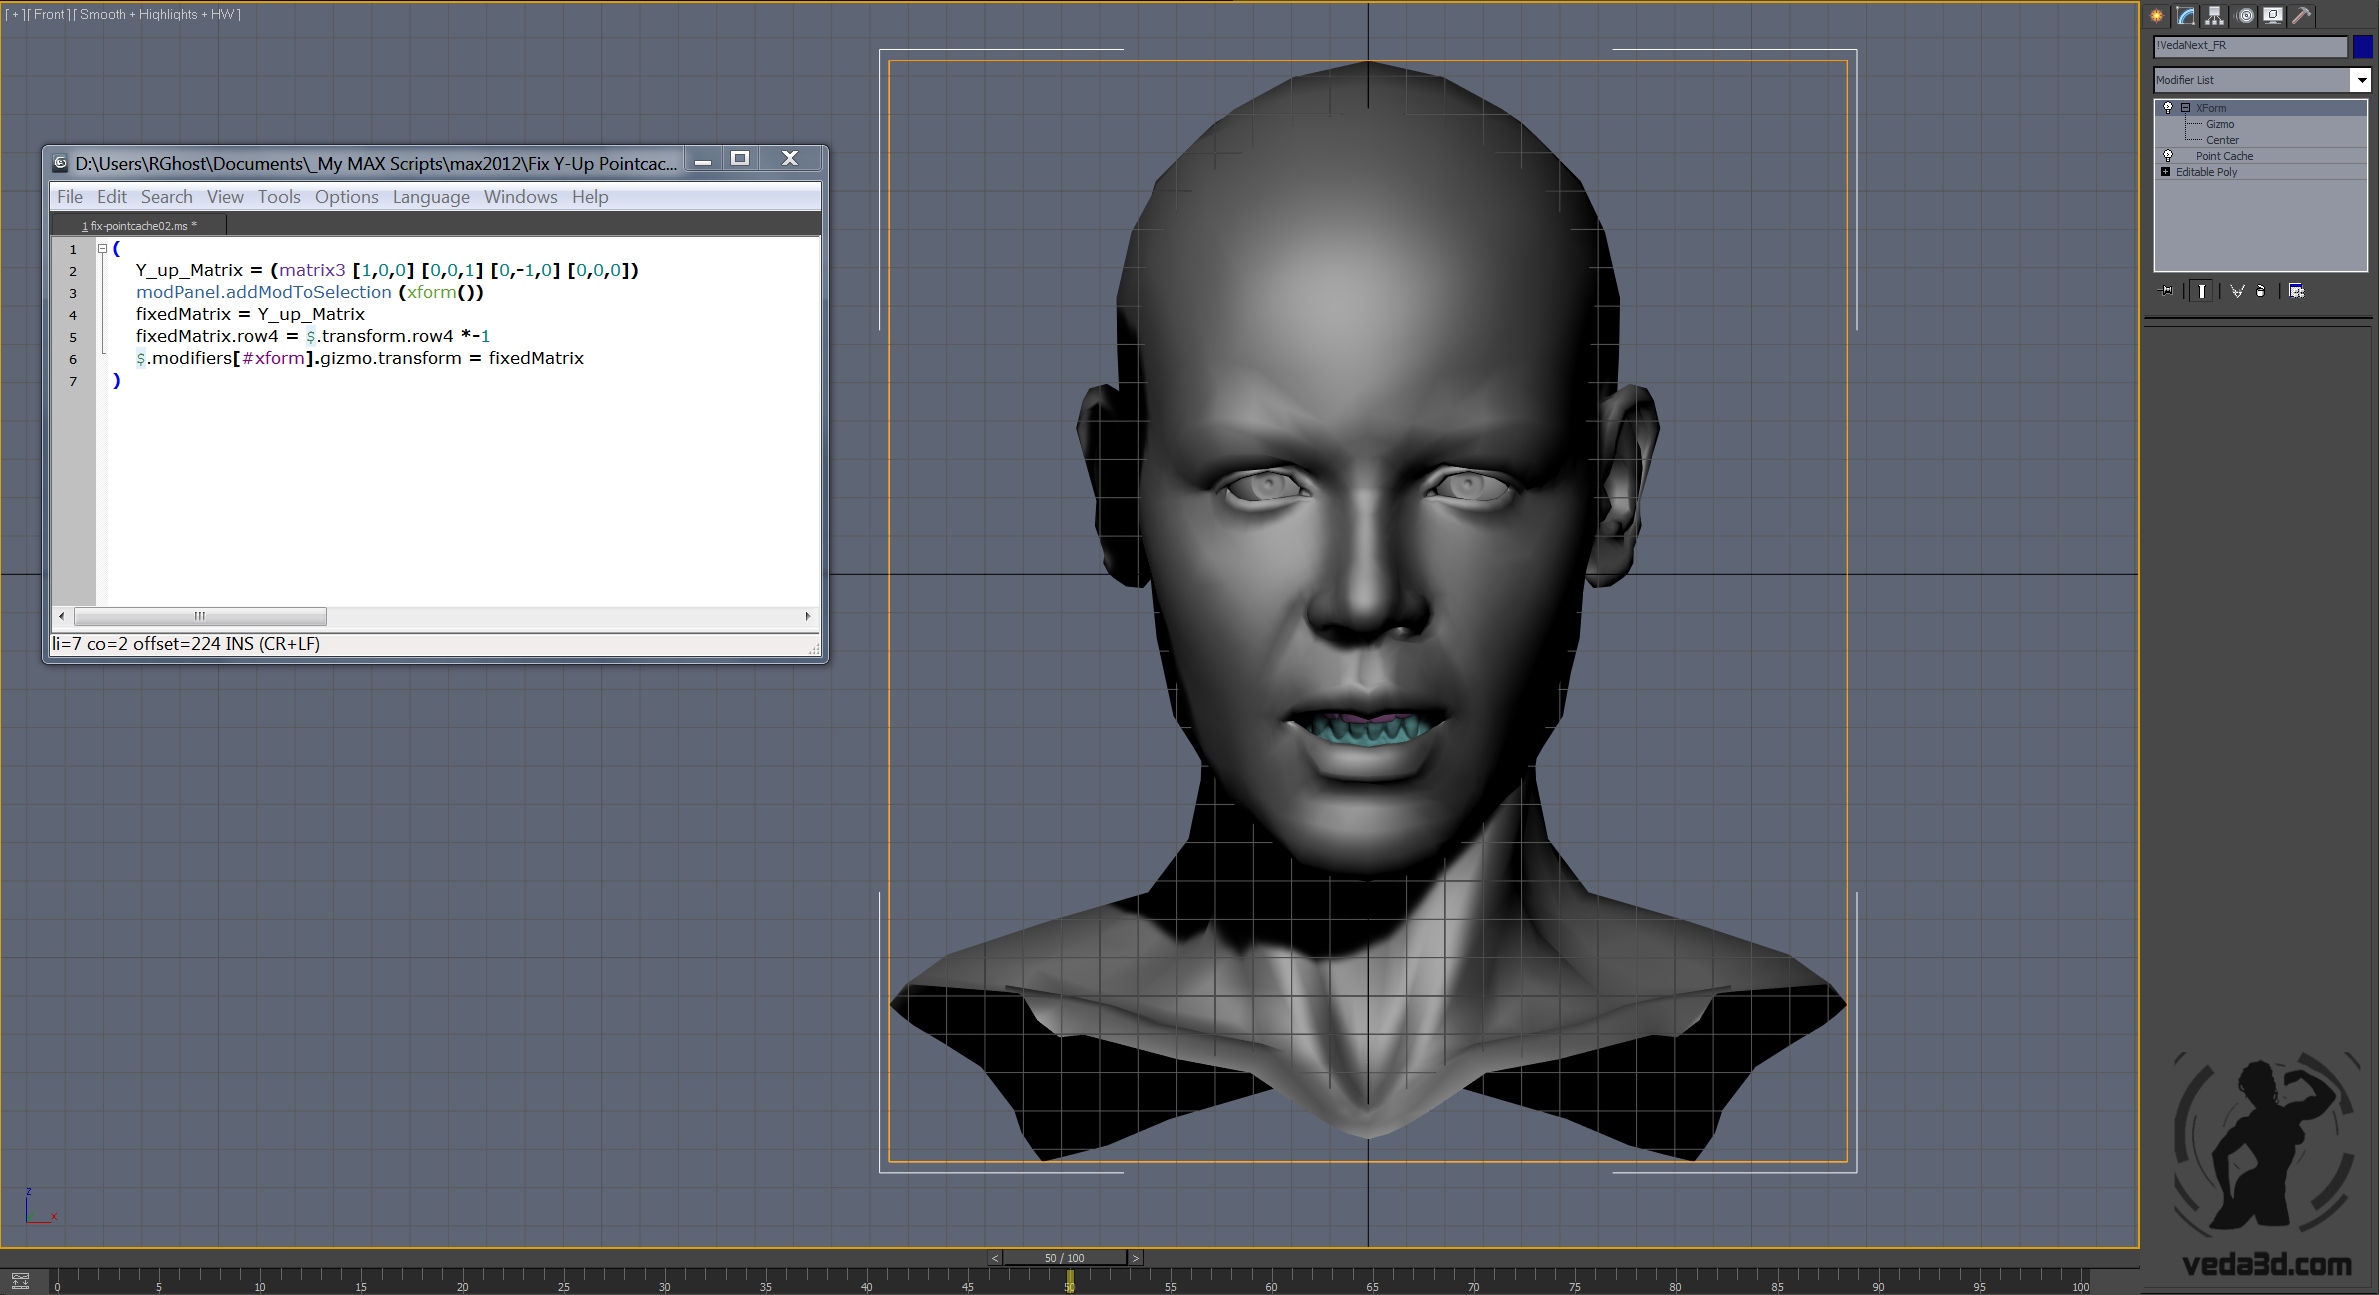 Fixed 3d model of the Veda's head after applied maxscript code snippet